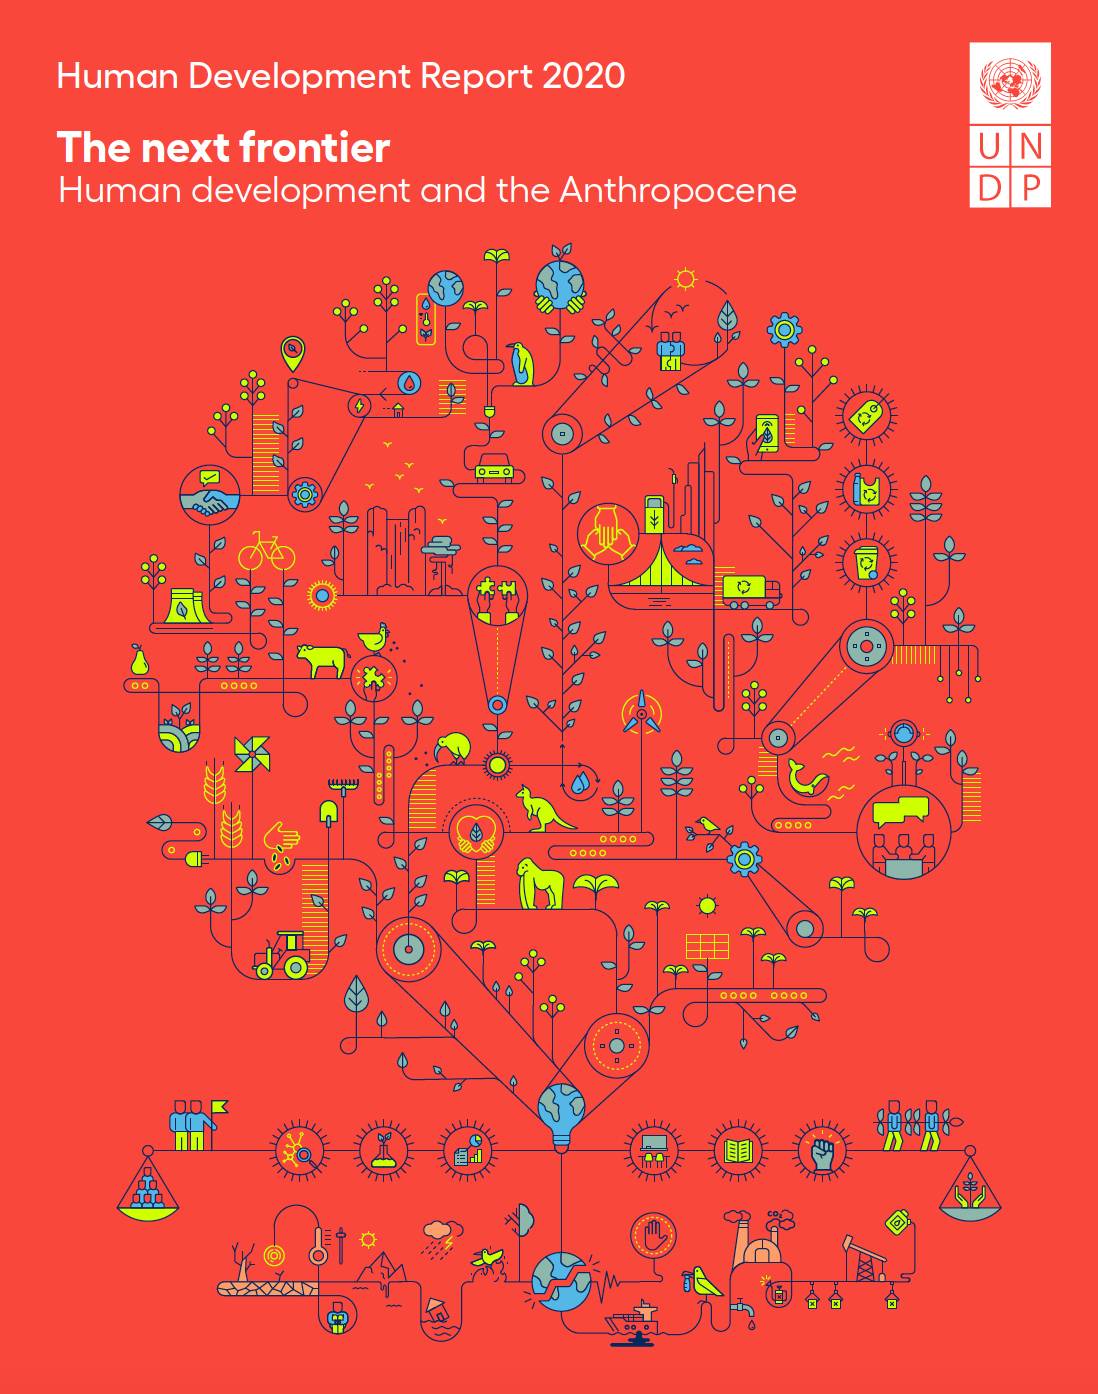 The next frontier: Human development and the Anthropocene